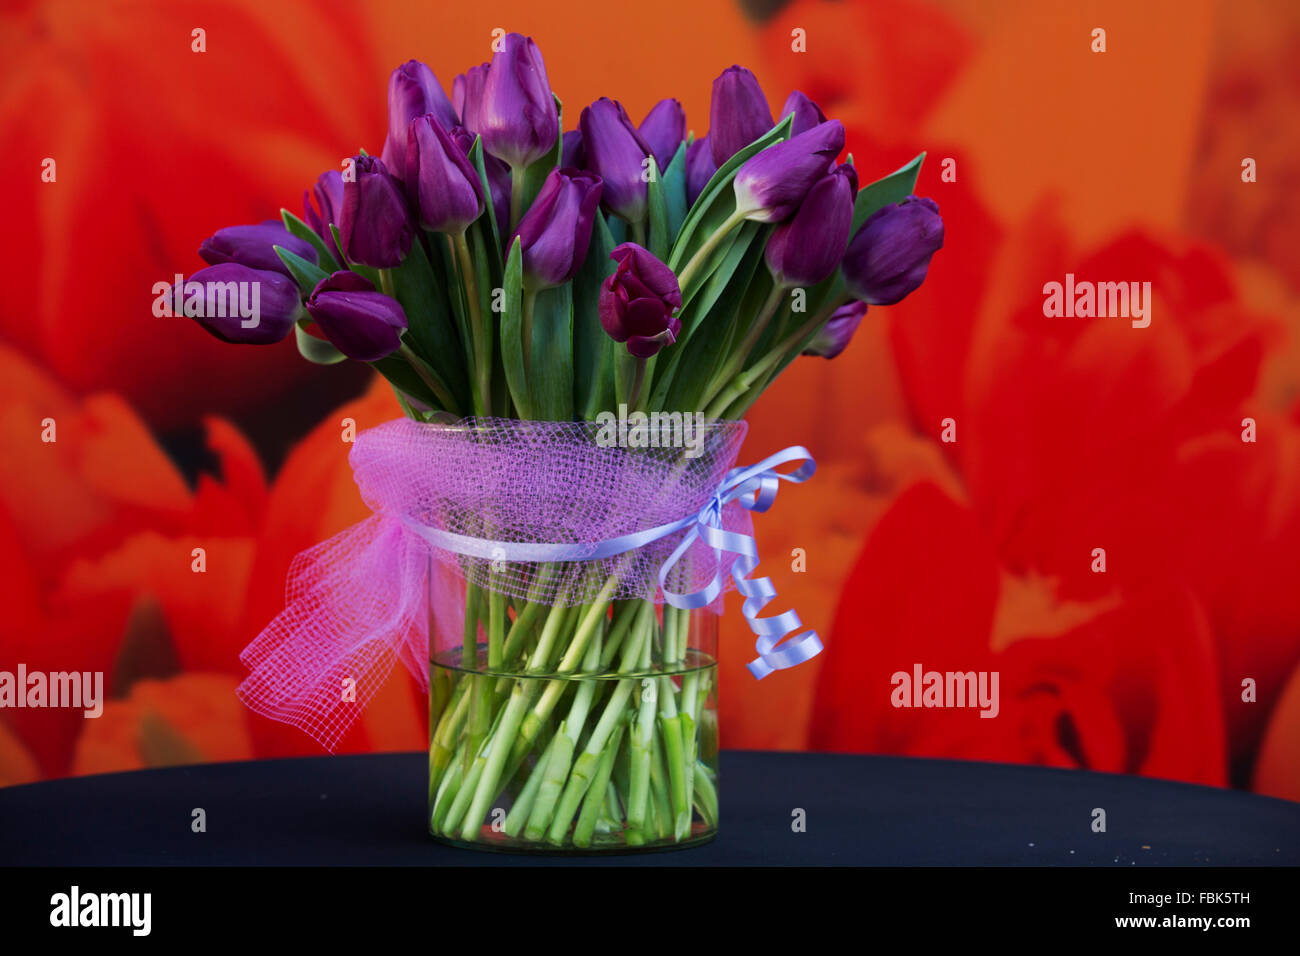 The Spinoza tulip is unveiled on National Tulip Day in Amsterdam, the Netherlands. The day is the third Saturday in January. Stock Photo